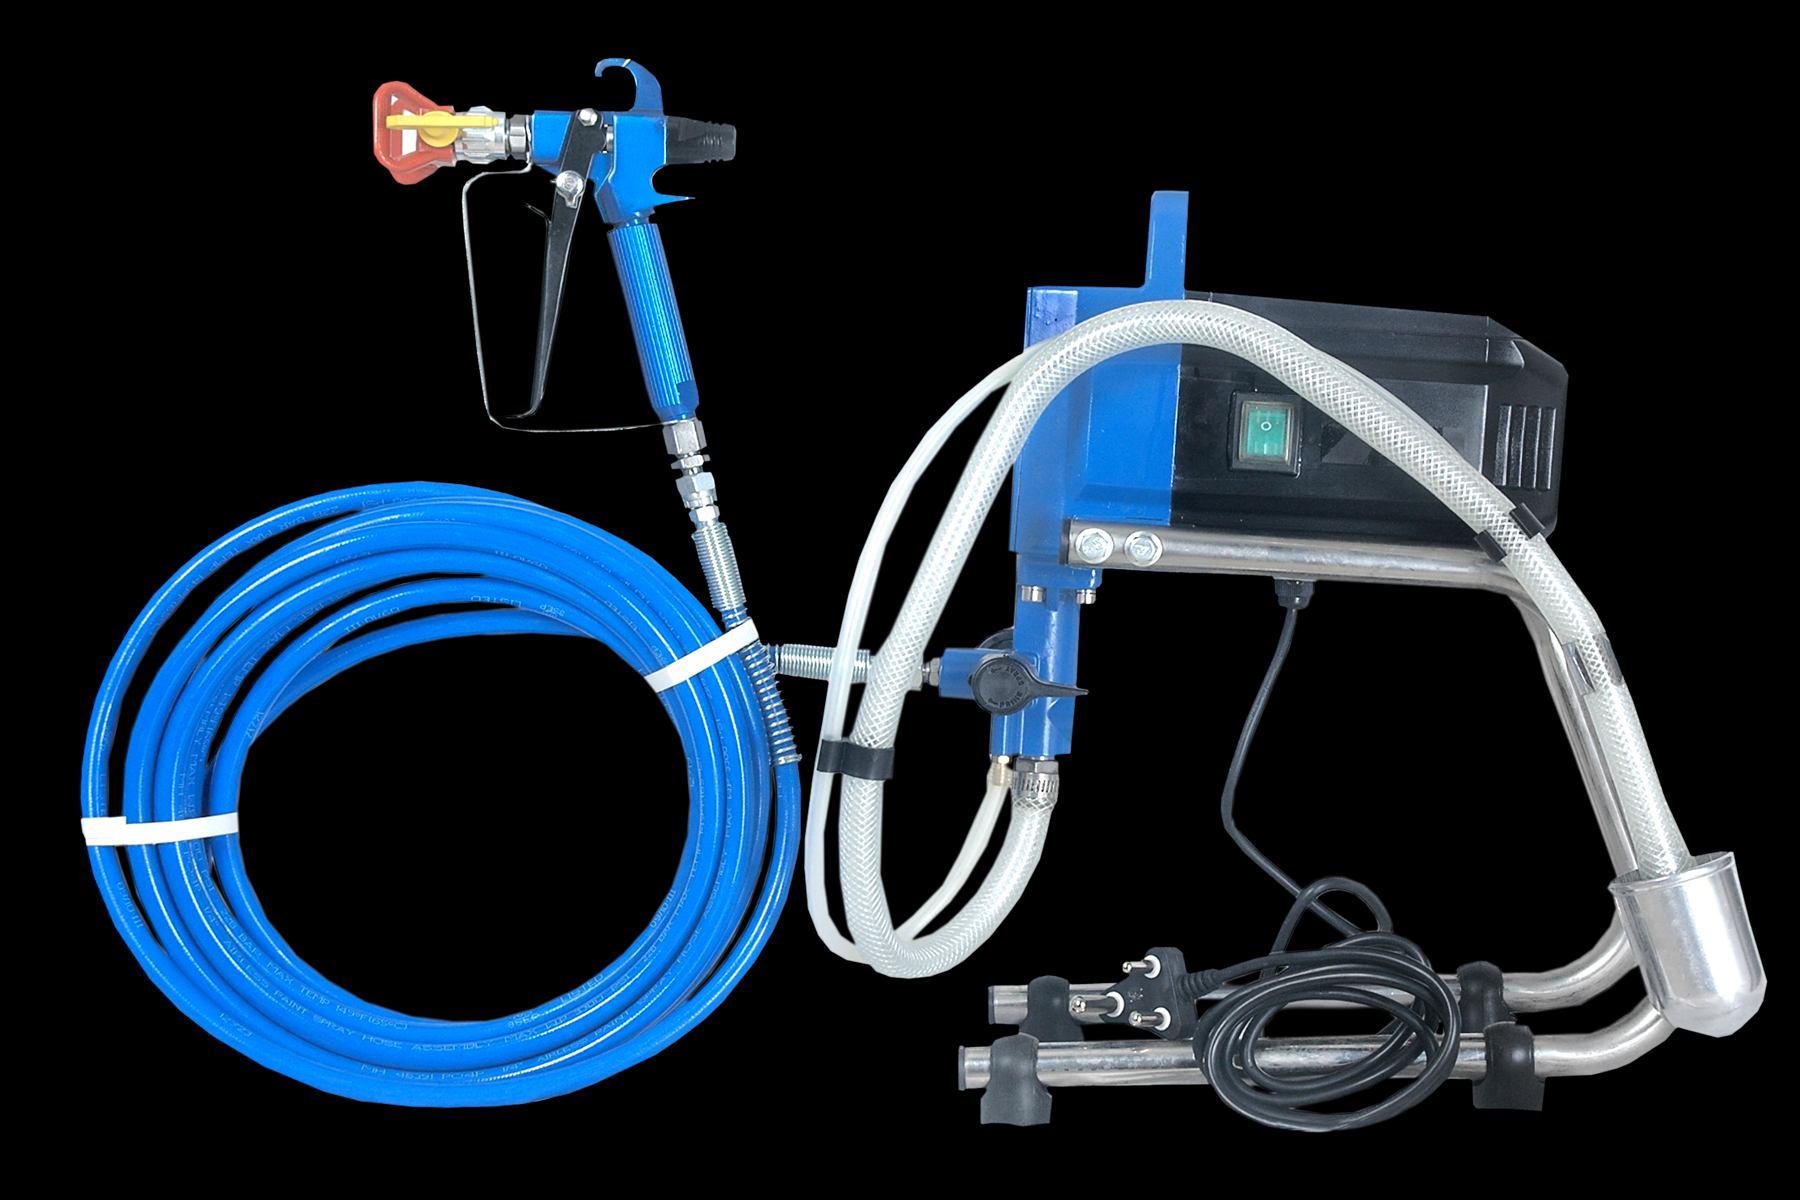 Smart Electric Spray Painting Equipment